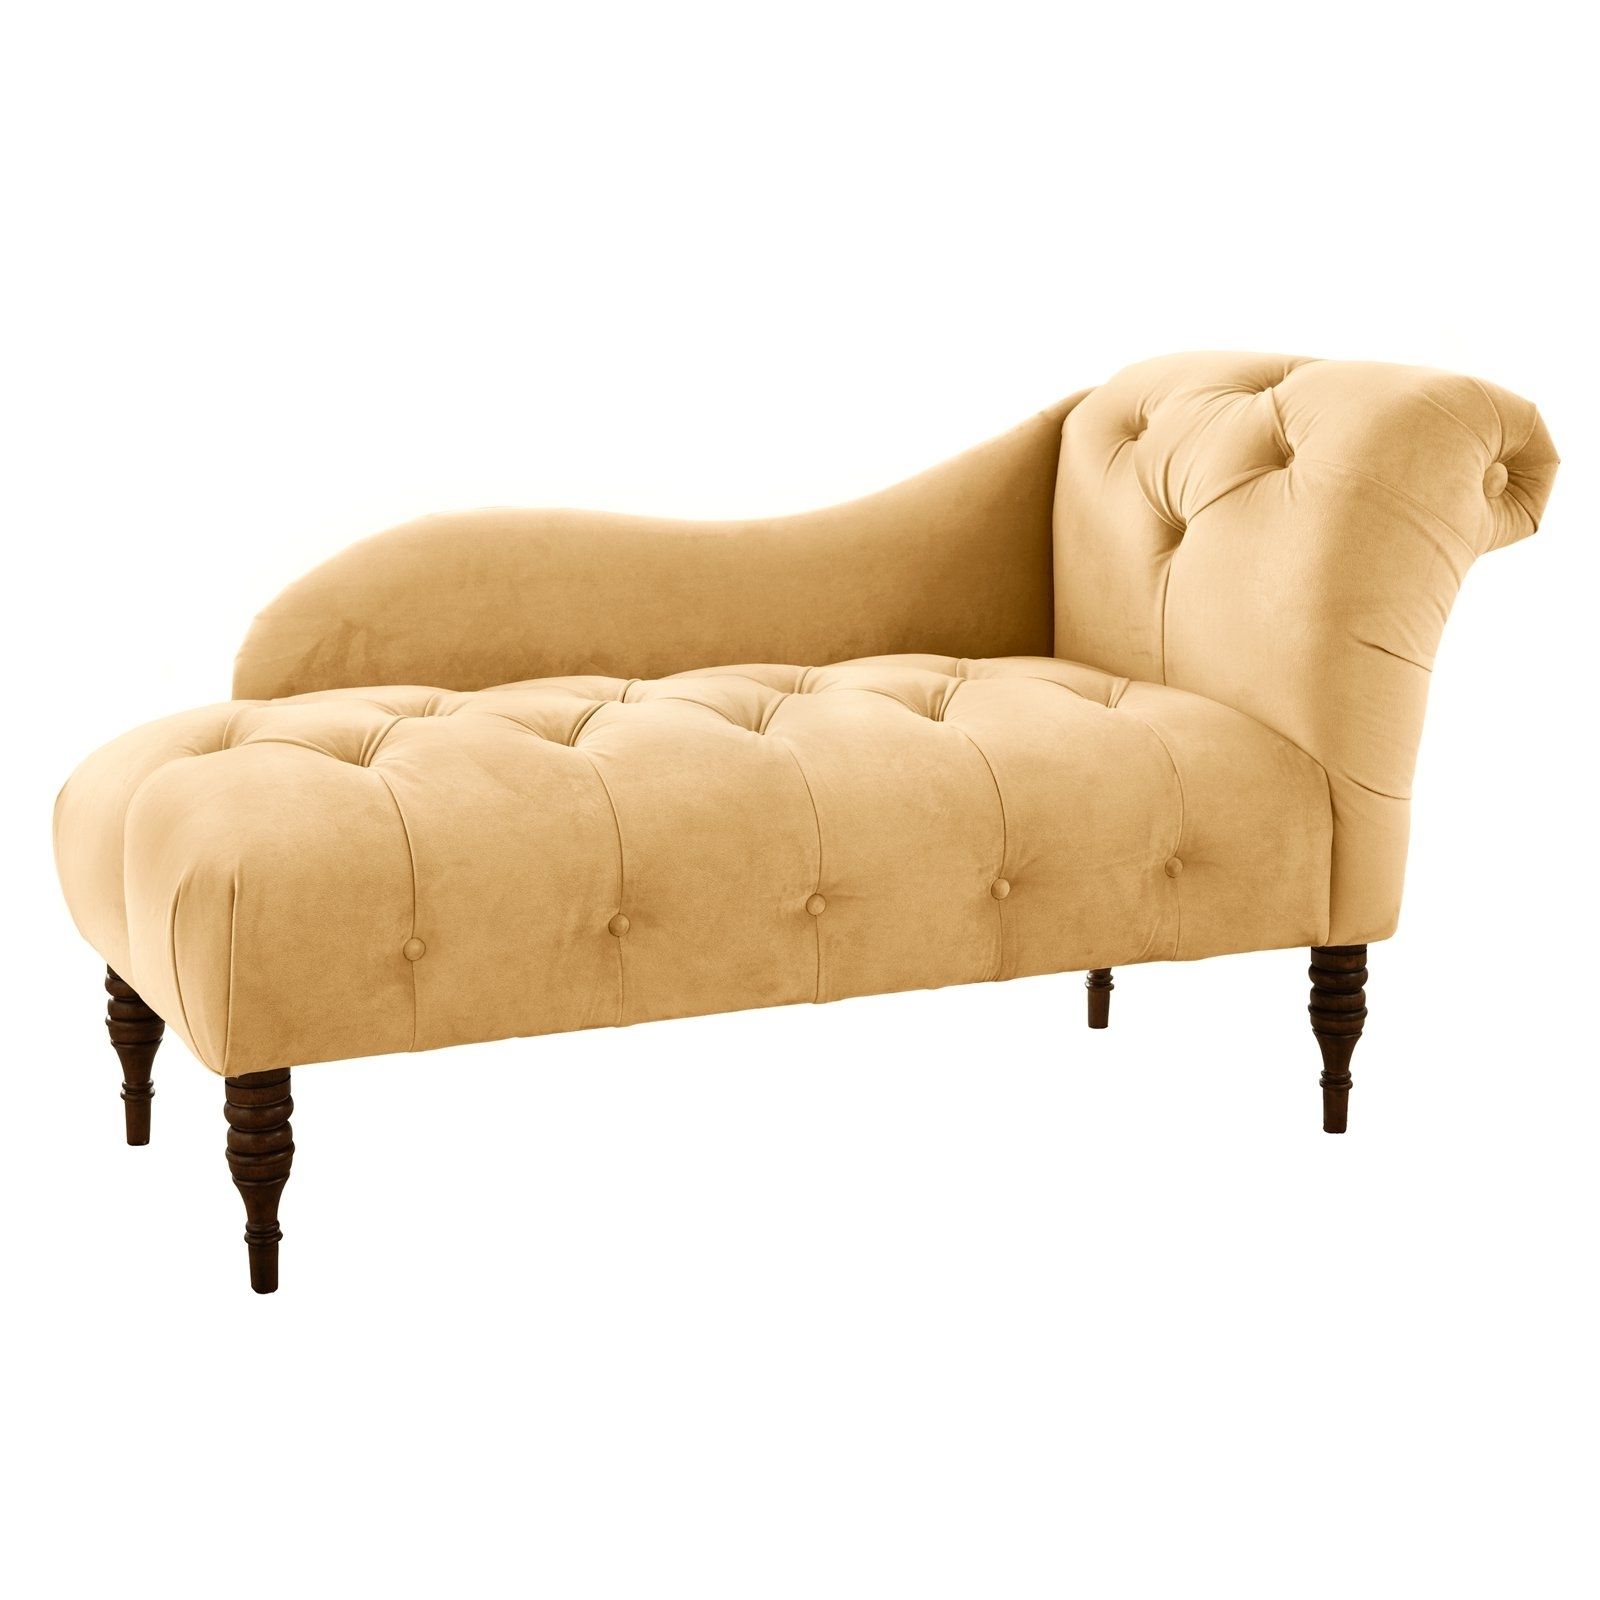 Hayneedle Intended For Newest Tufted Chaise Lounges (View 1 of 15)